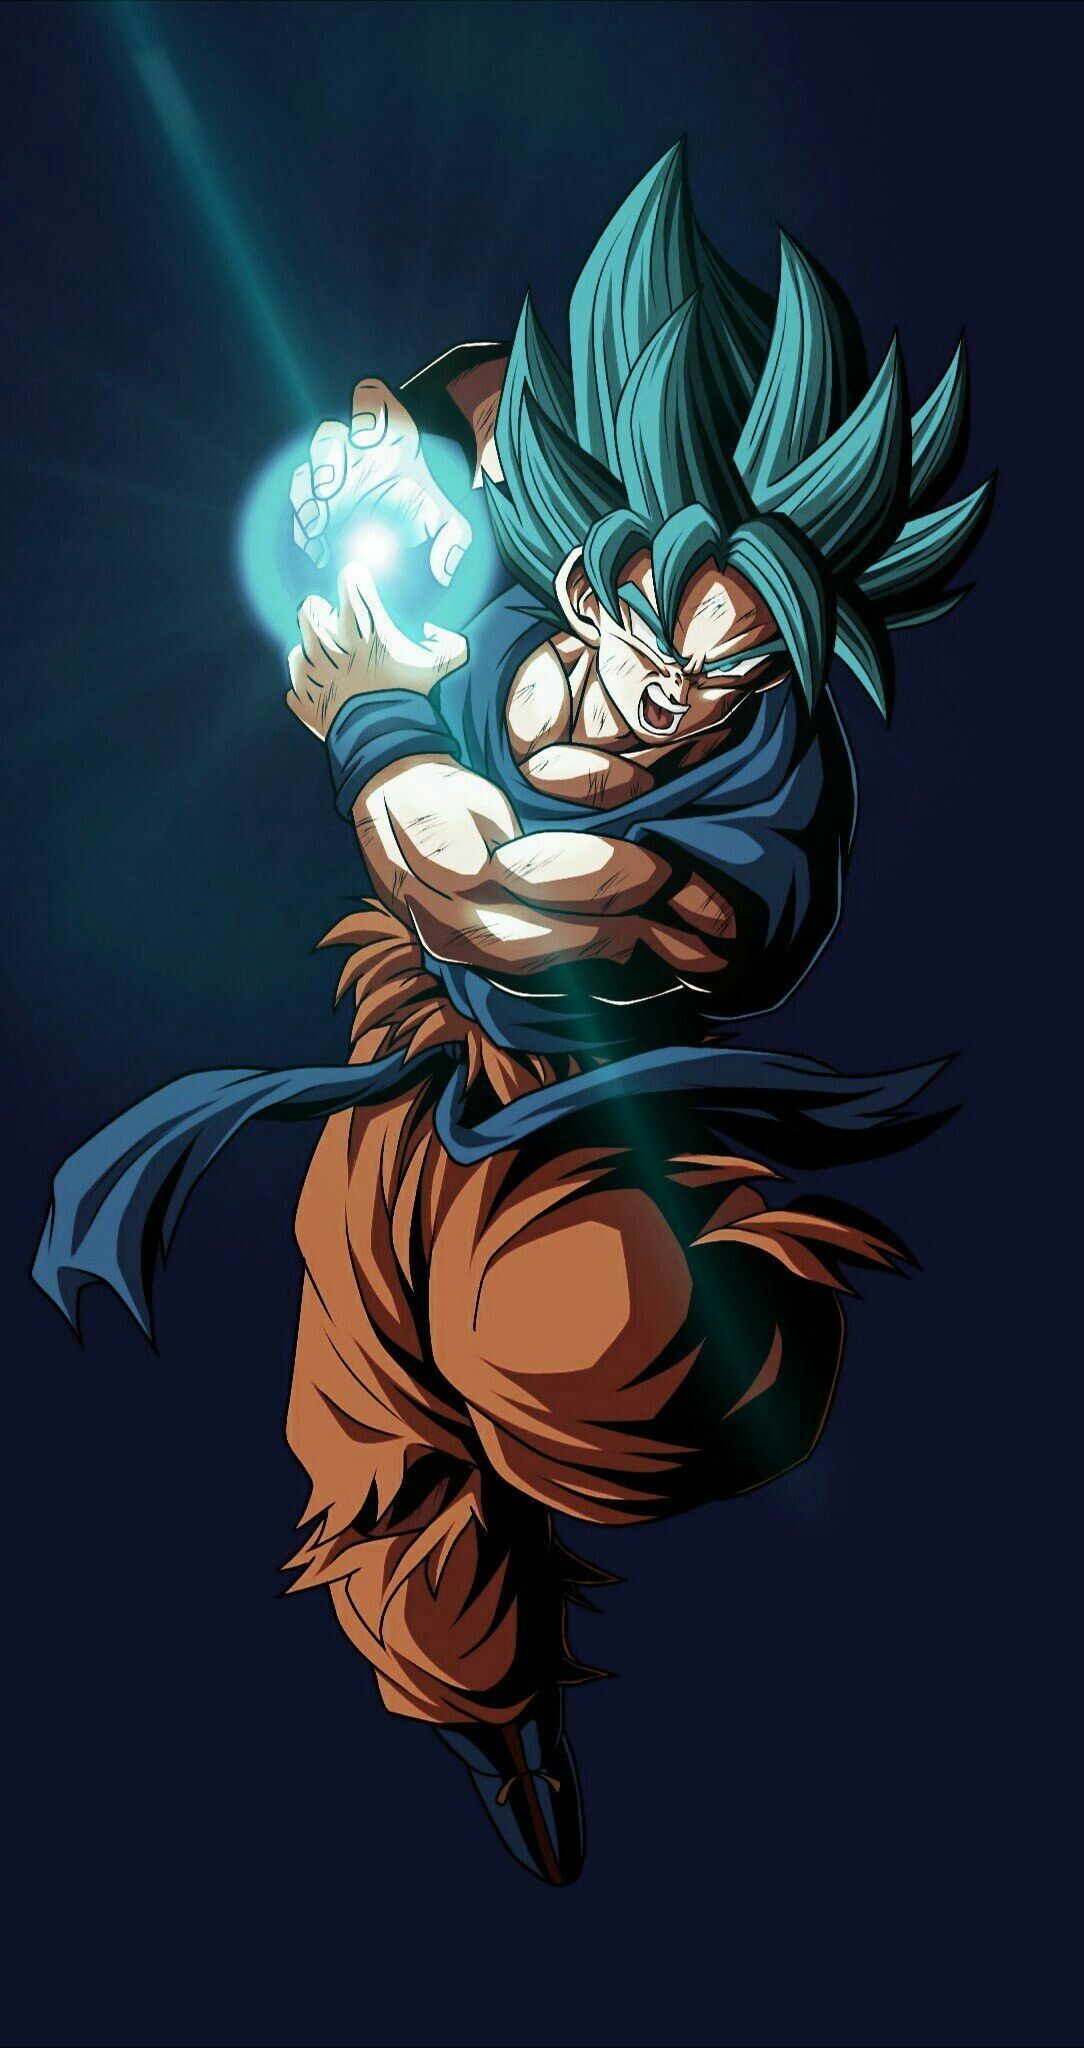 Goku: Super Saiyan Blue, The transformation of the Saiyan race, Shooting out a powerful beam of energy. 1090x2050 HD Background.